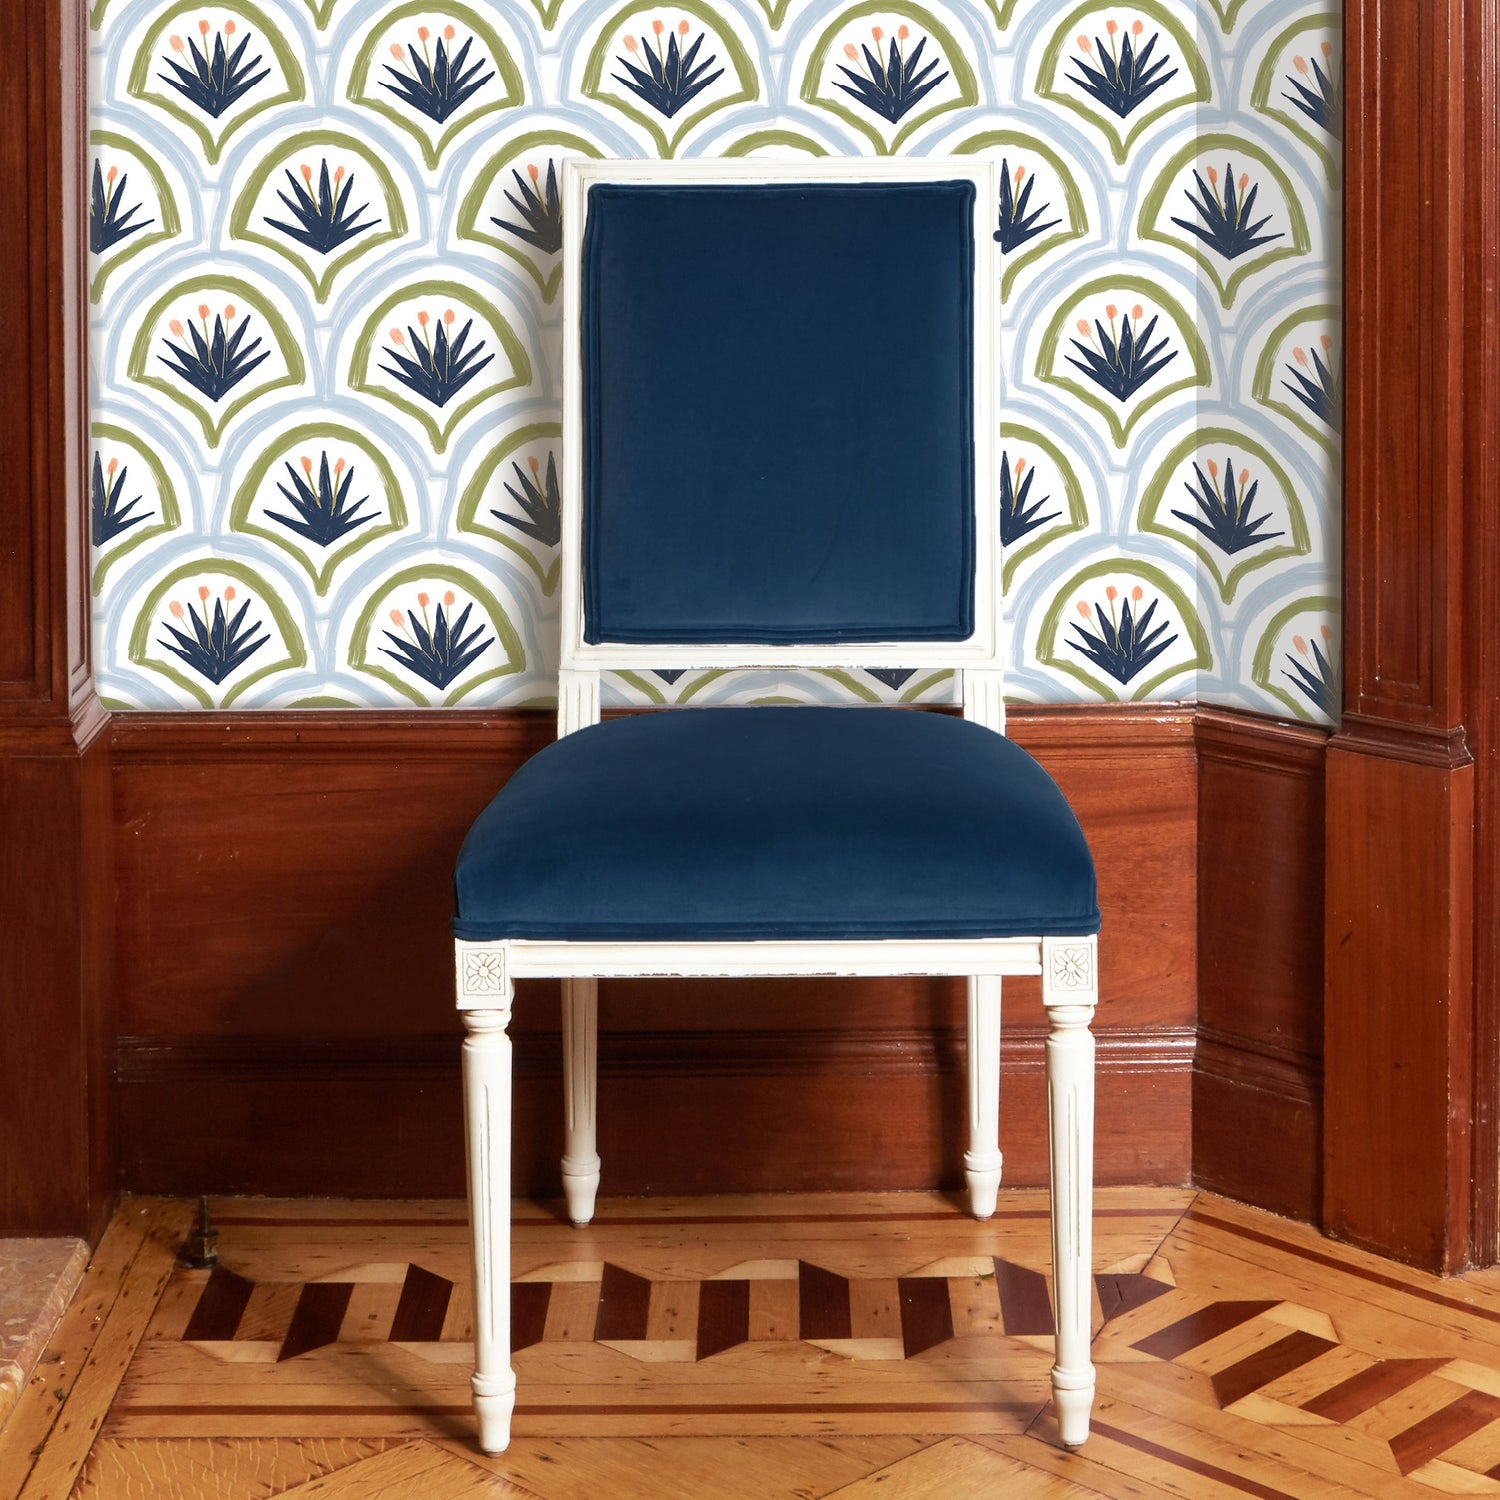 Navy Blue Velvet Chair Close-up styled with Art Deco Palm Pattern Printed Wallpaper